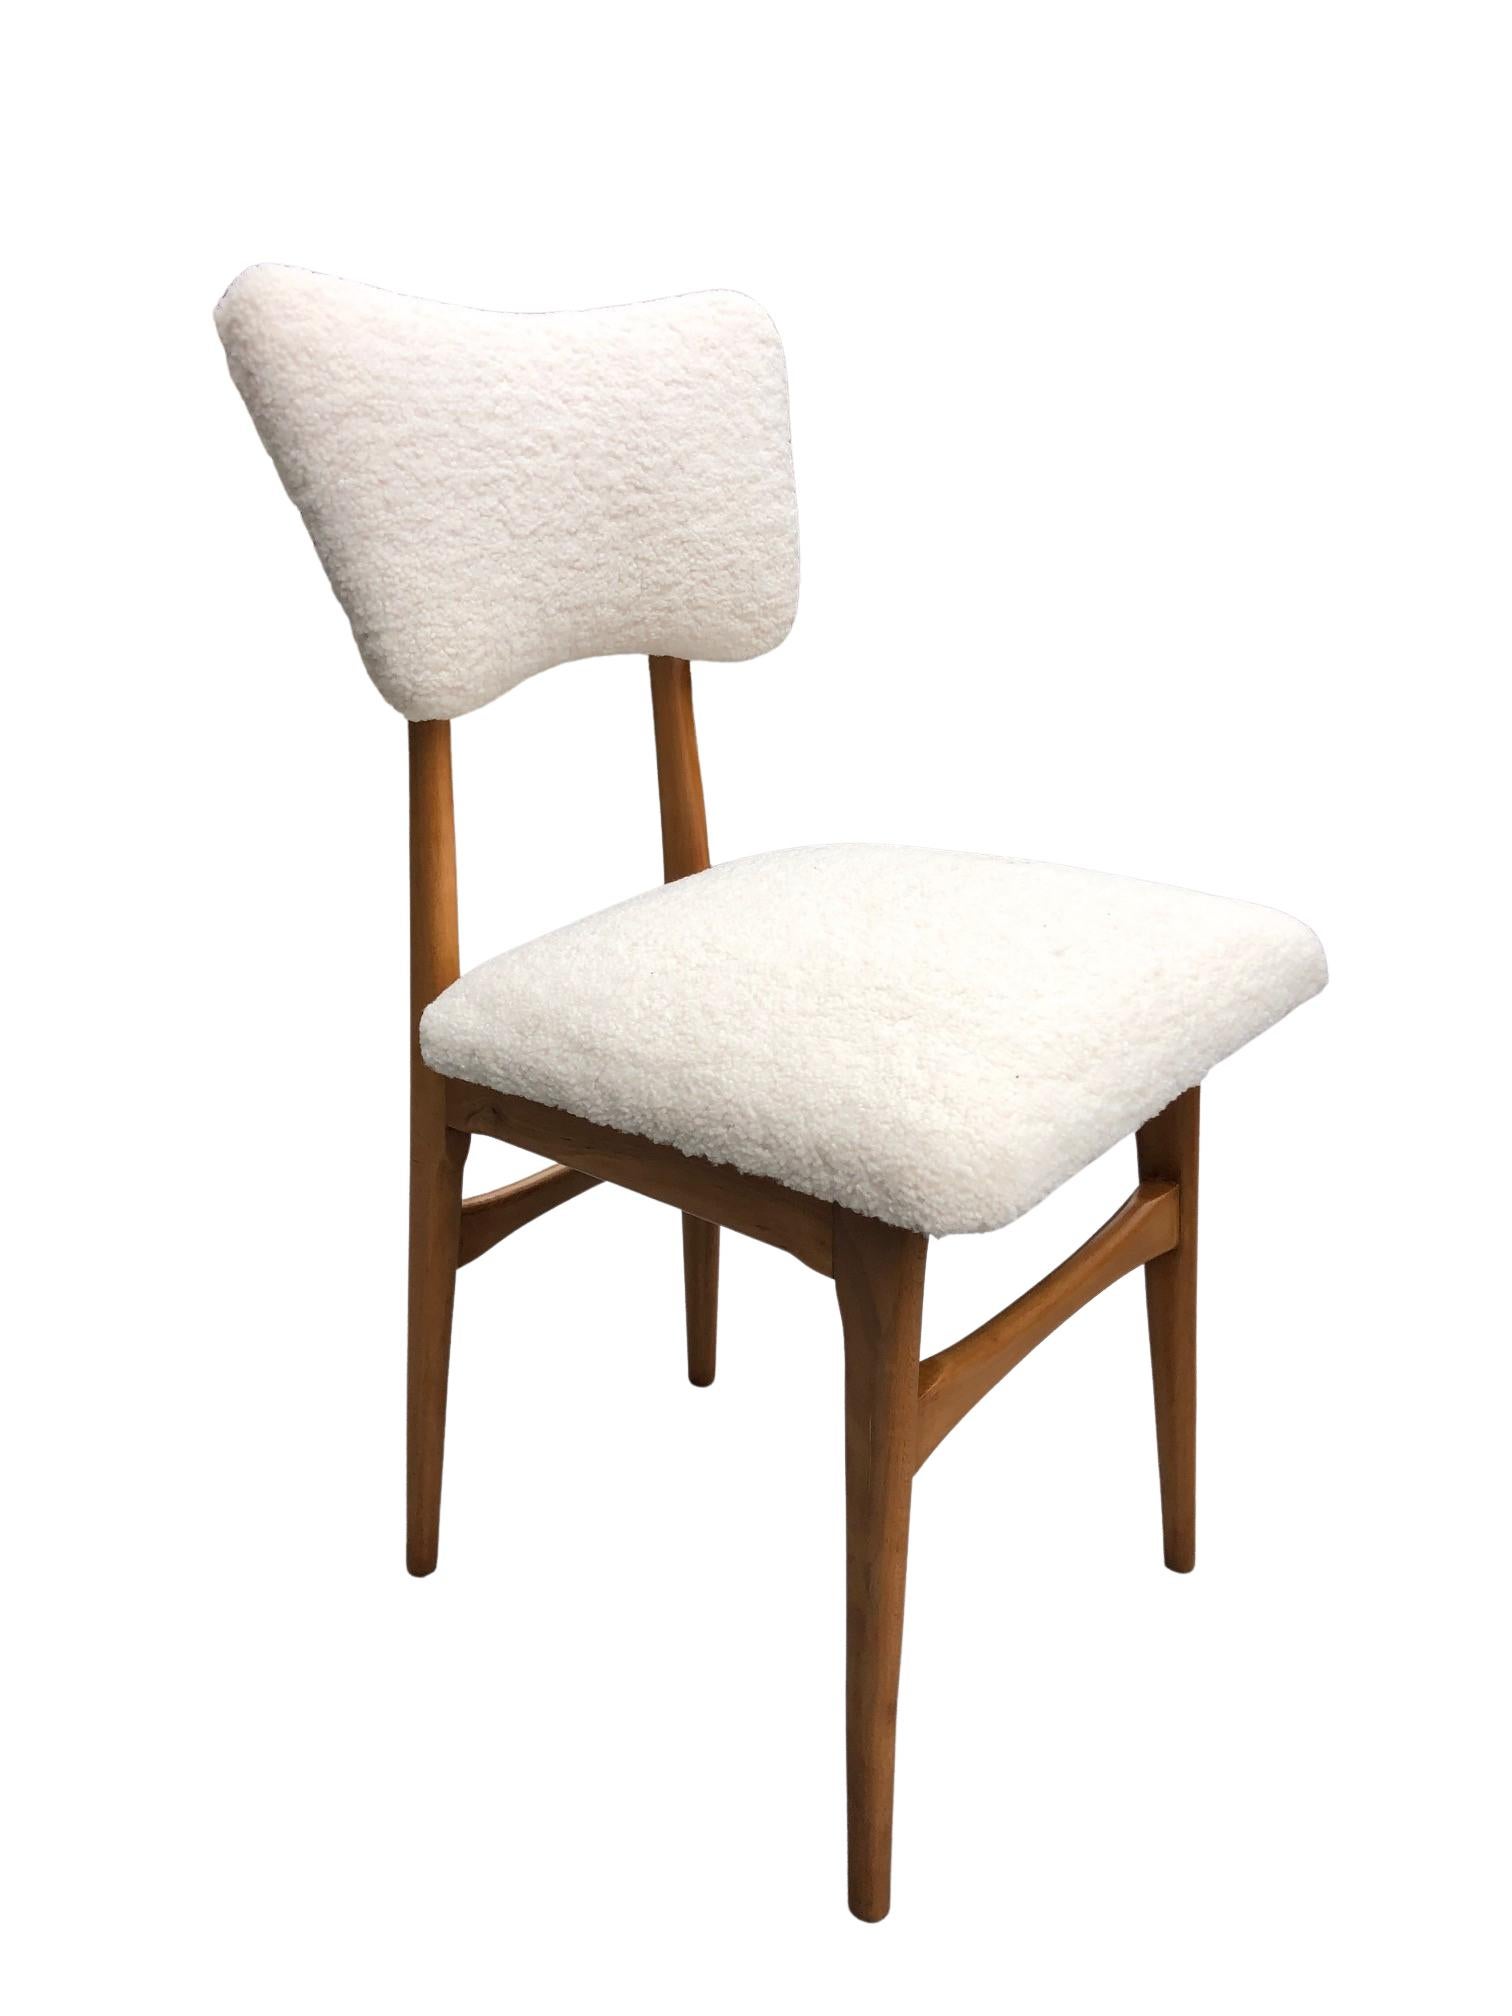 Midcentury Cream Bouclé and Wood Dining Chairs, Europe, 1960s, Set of Four For Sale 6